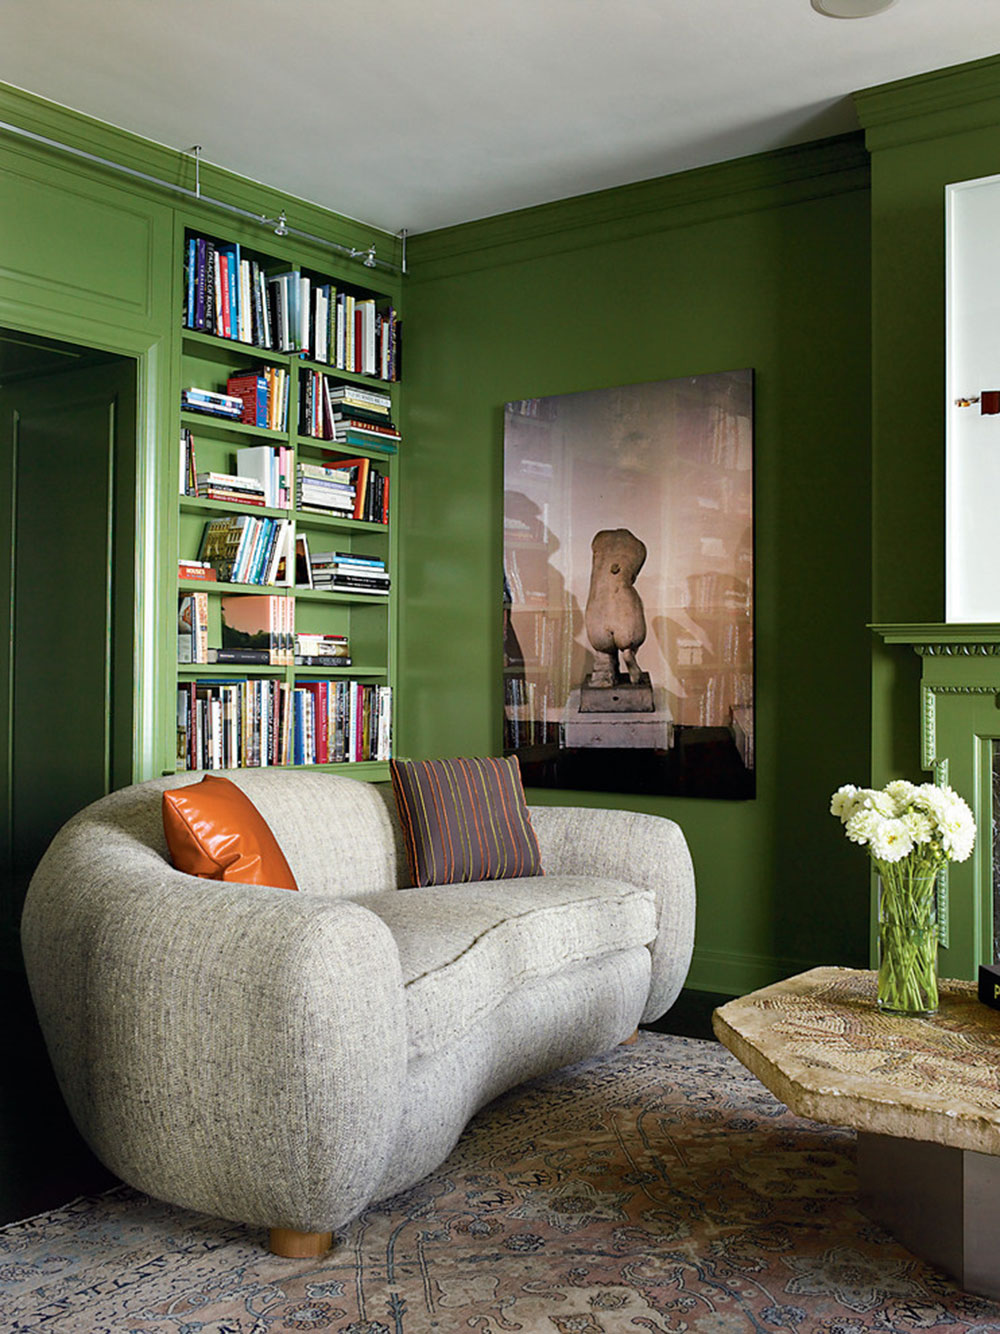 Brilliant shades of green for your living room10 brilliant shades of green for your living room